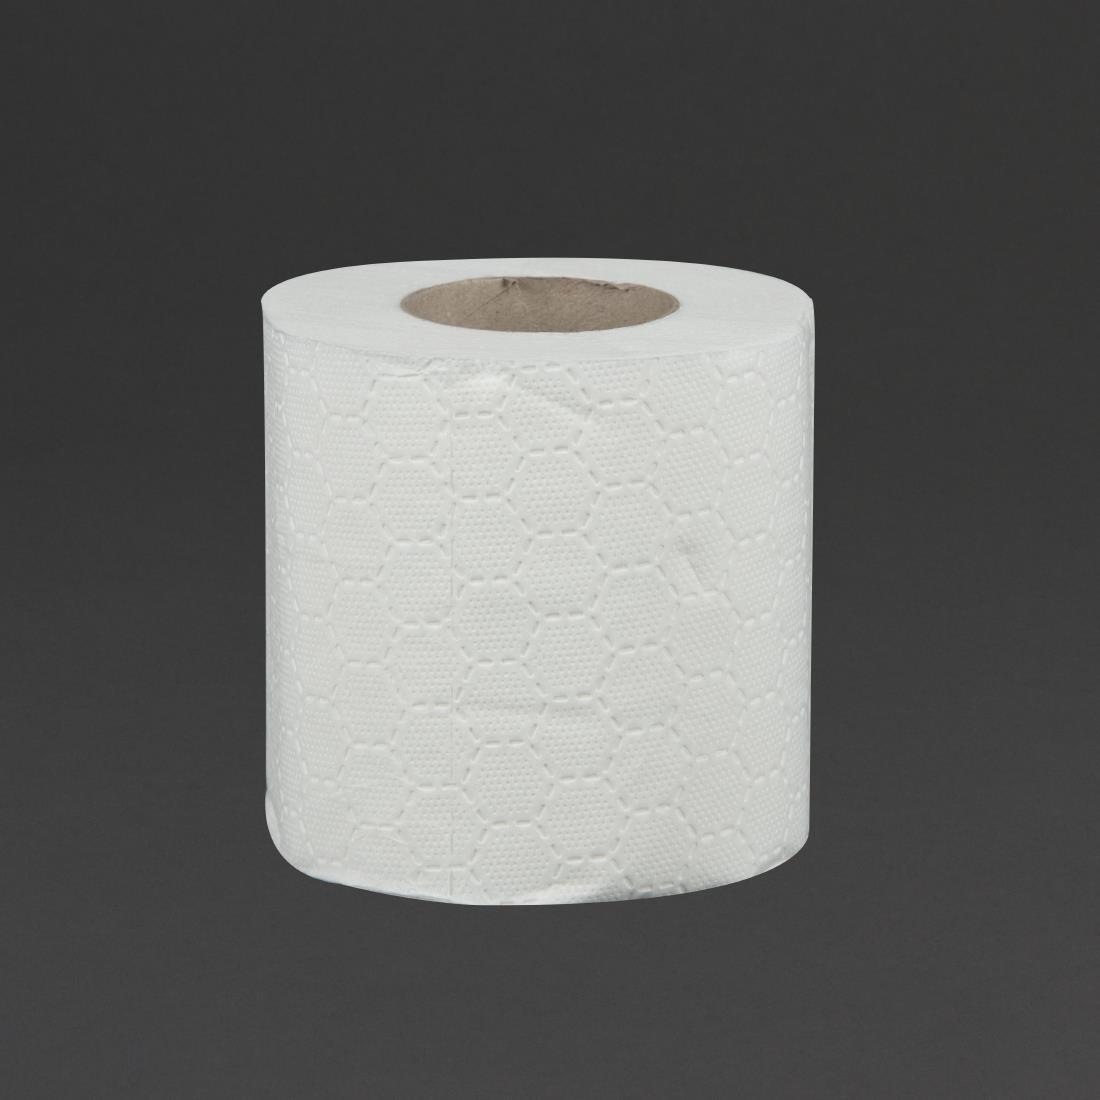 Jantex Standard Toilet Paper 2-Ply (Pack of 36) - GD751  - 2